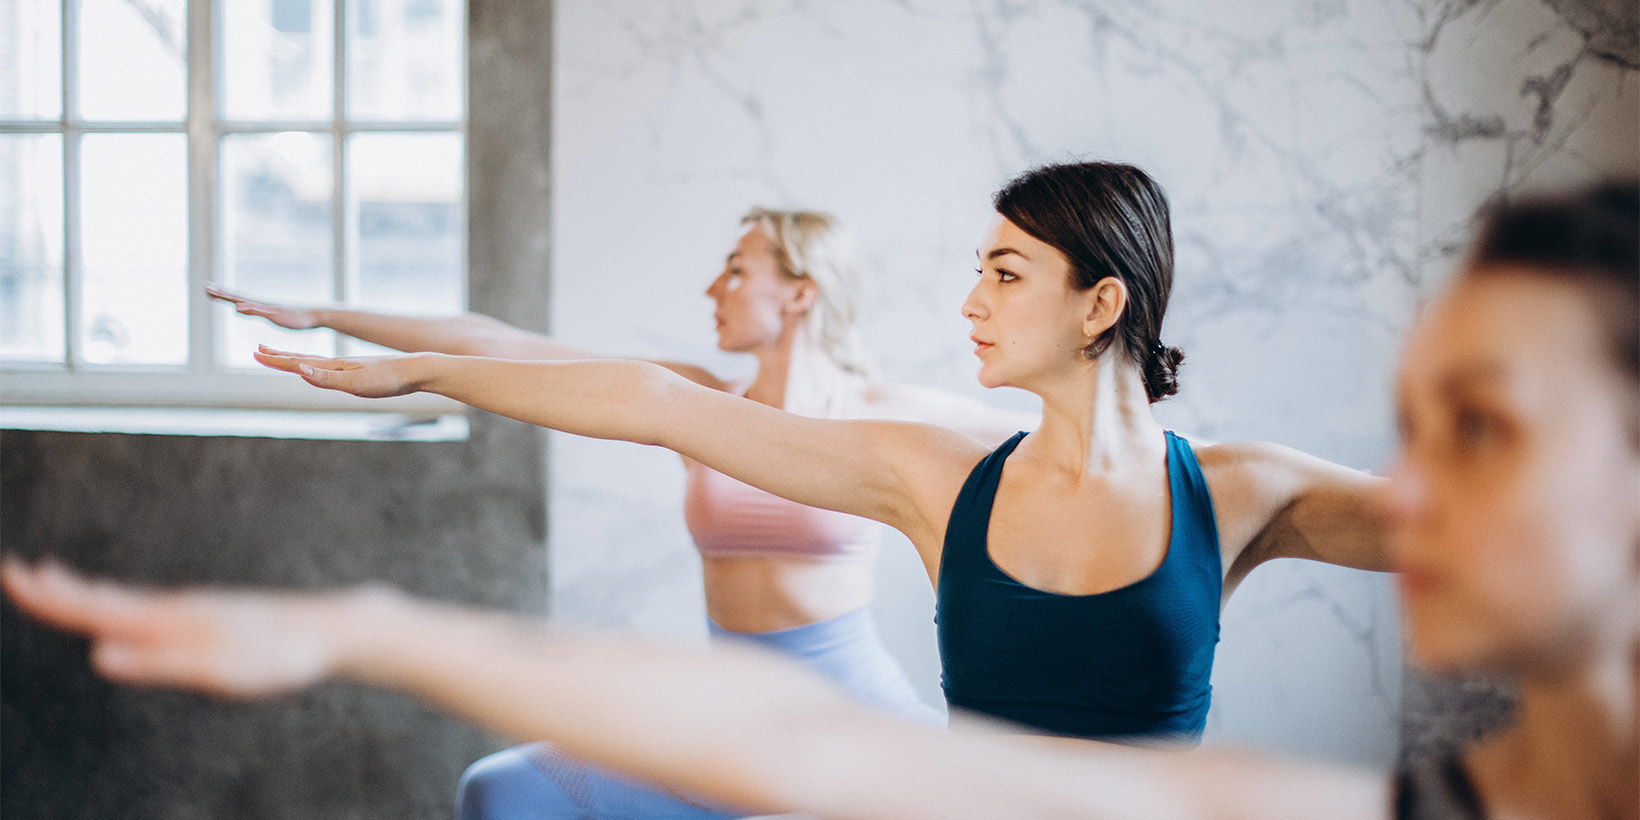 Text What Is Trauma-Informed Yoga And How Can You Make Your Classes Trauma-Sensitive?